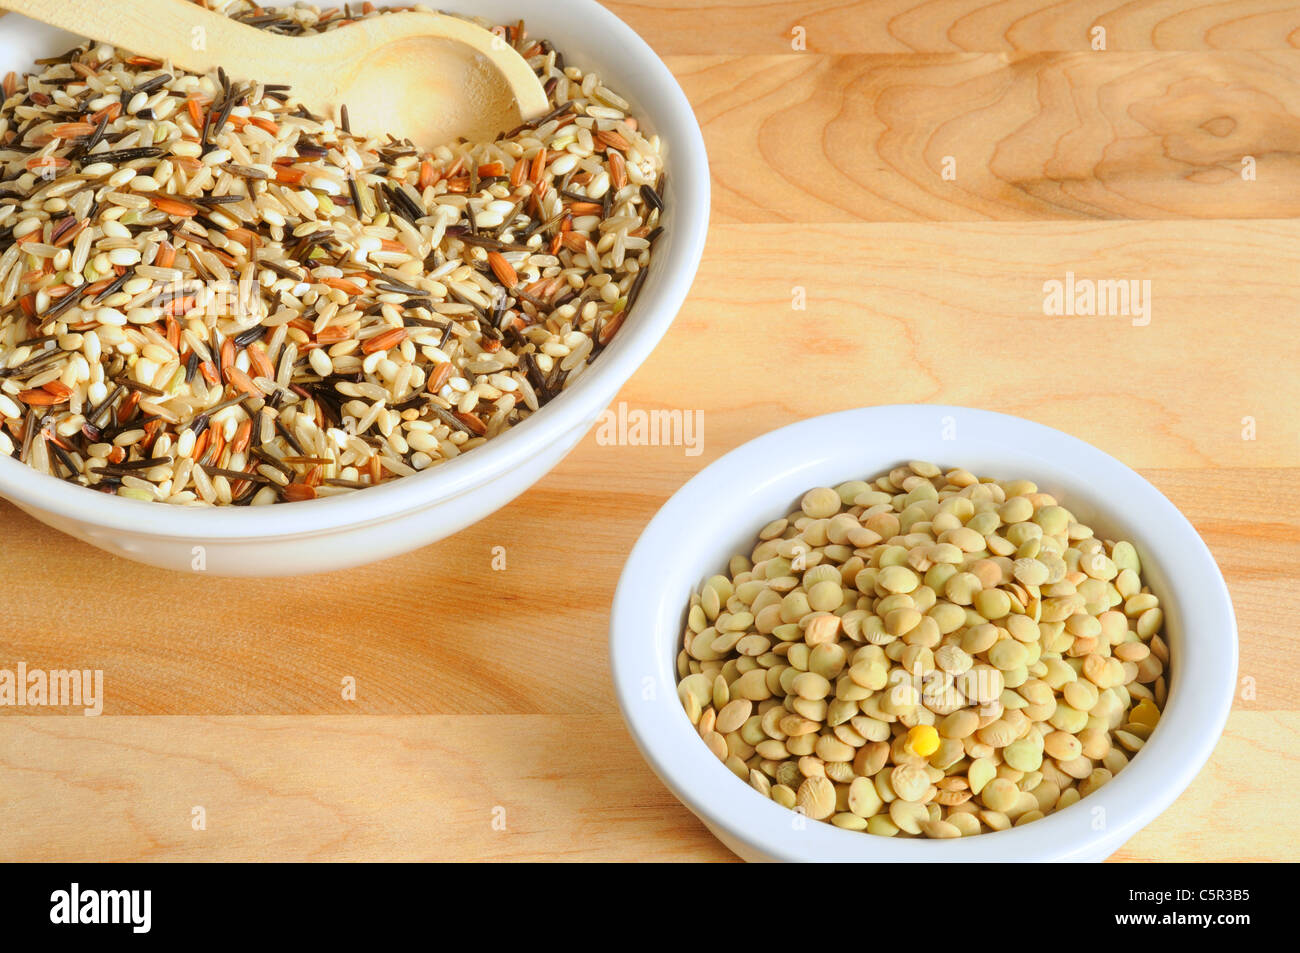 Bowls of uncooked wild rice and lentils on a cutting board Stock Photo